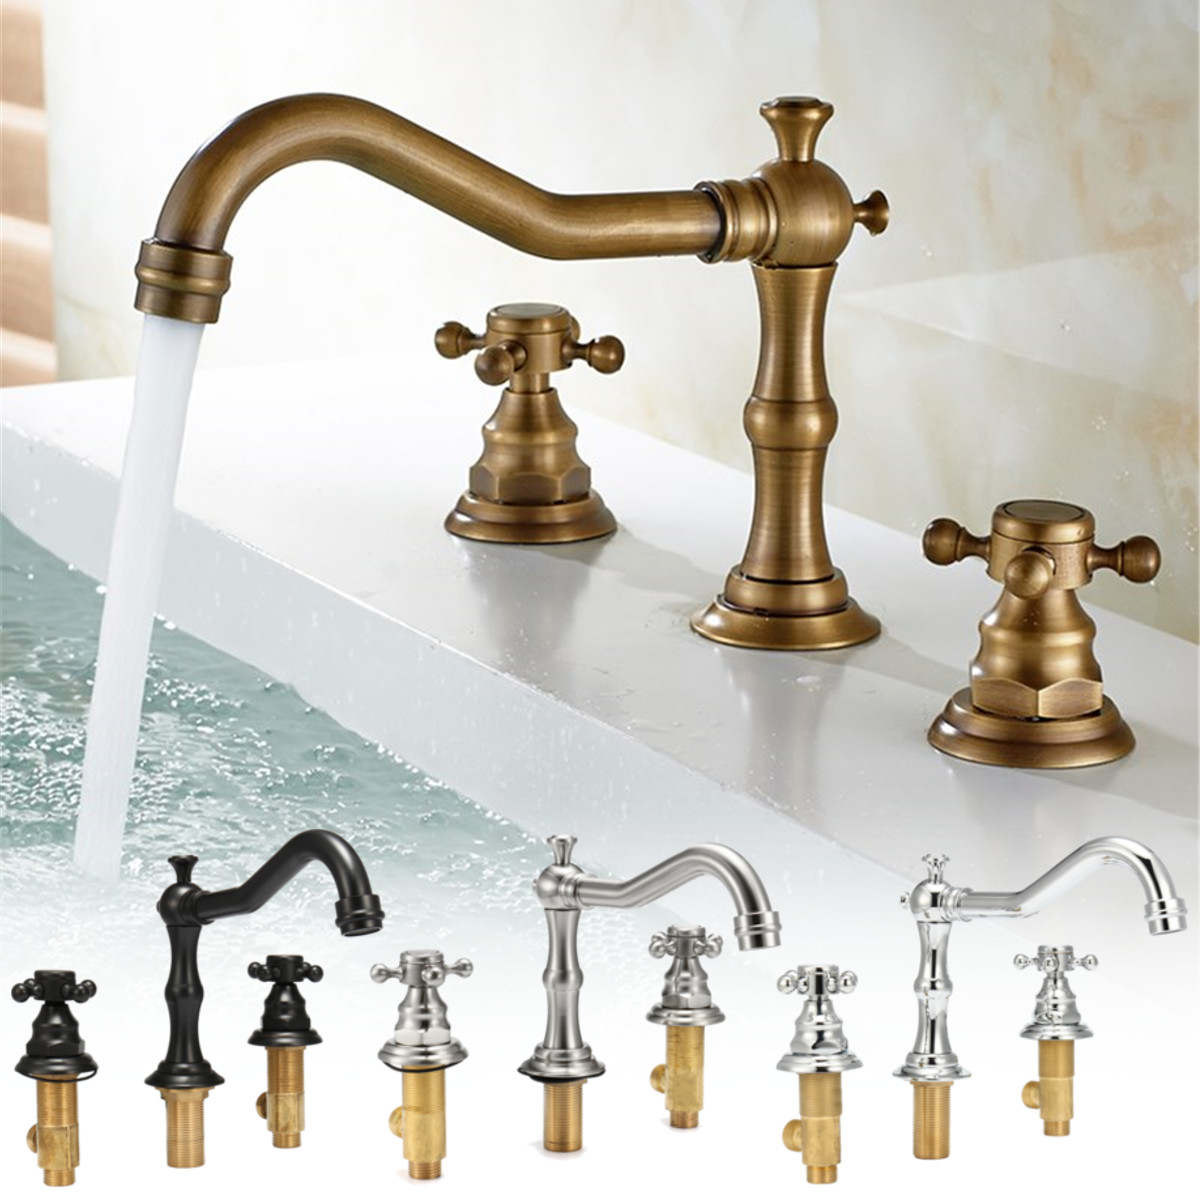 

Antique 3 Holes 2 Knobs Tub Spout Basin Bathroom Sink Waterfall Faucet Widespread Hot Cold Mixer Tap